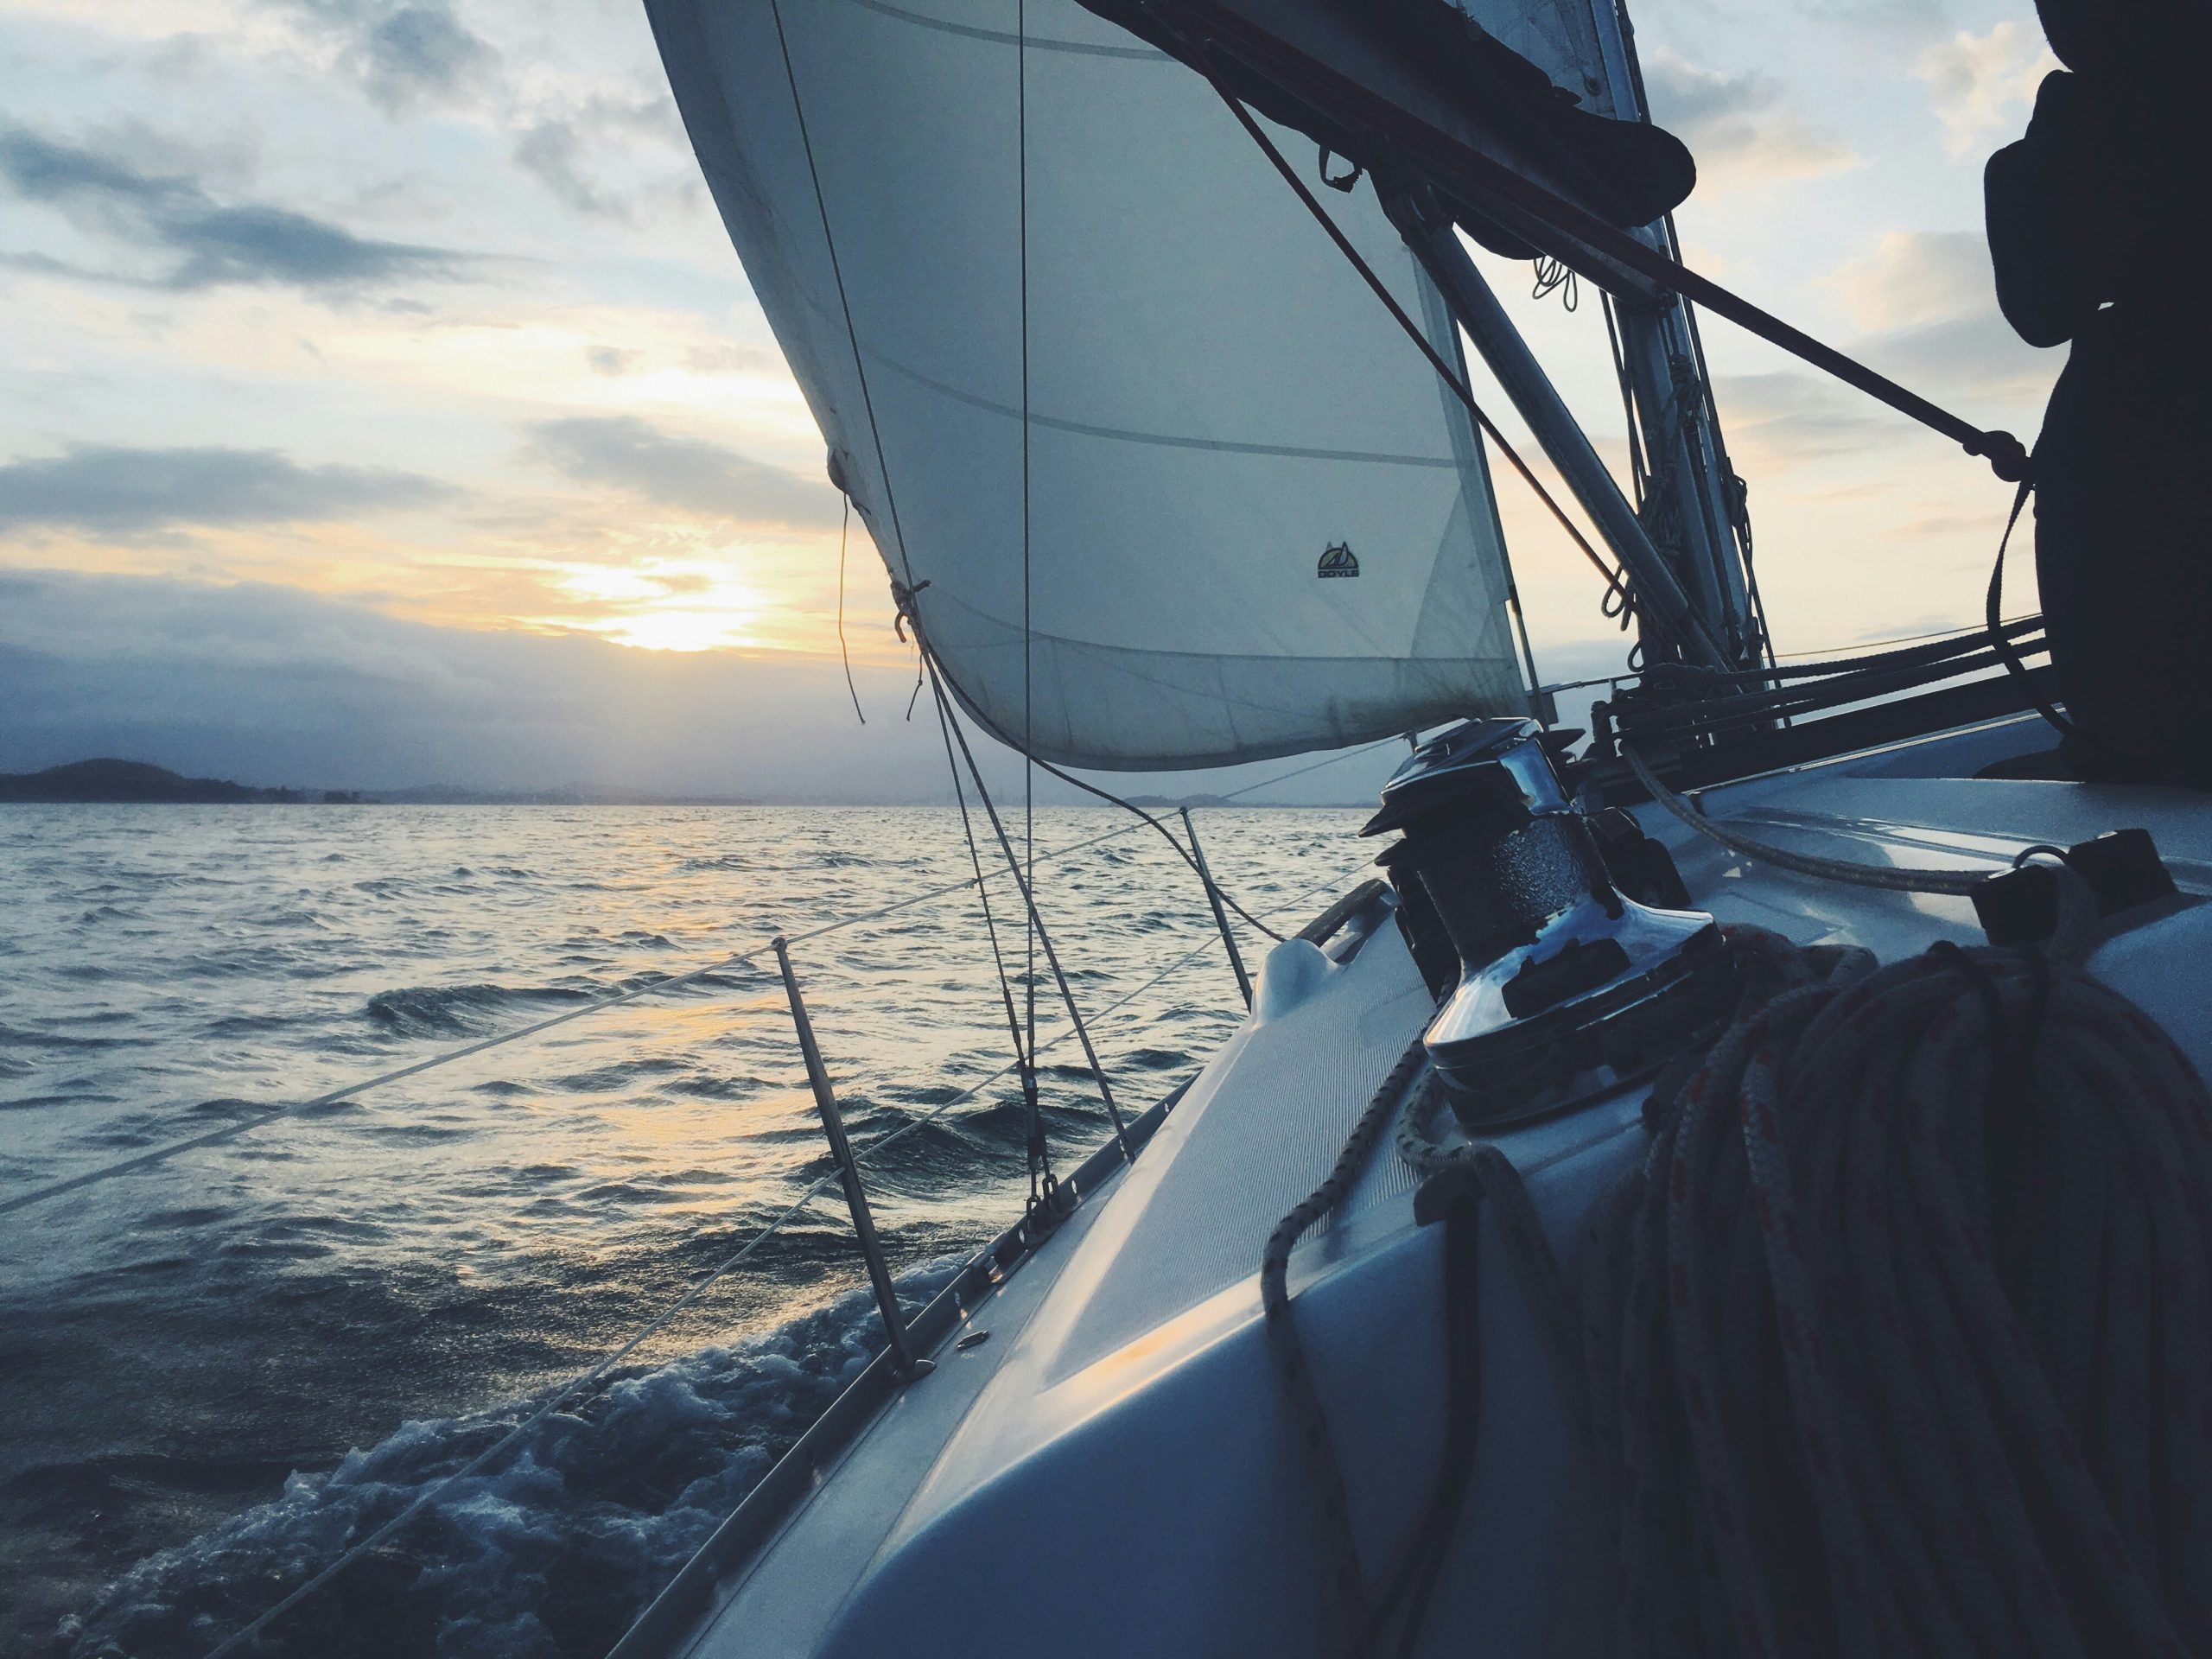 explore the world of sailing with expert guides, captivating stories, and useful tips for all sailors. get inspired and plan your next sailing adventure with insider knowledge and resources.